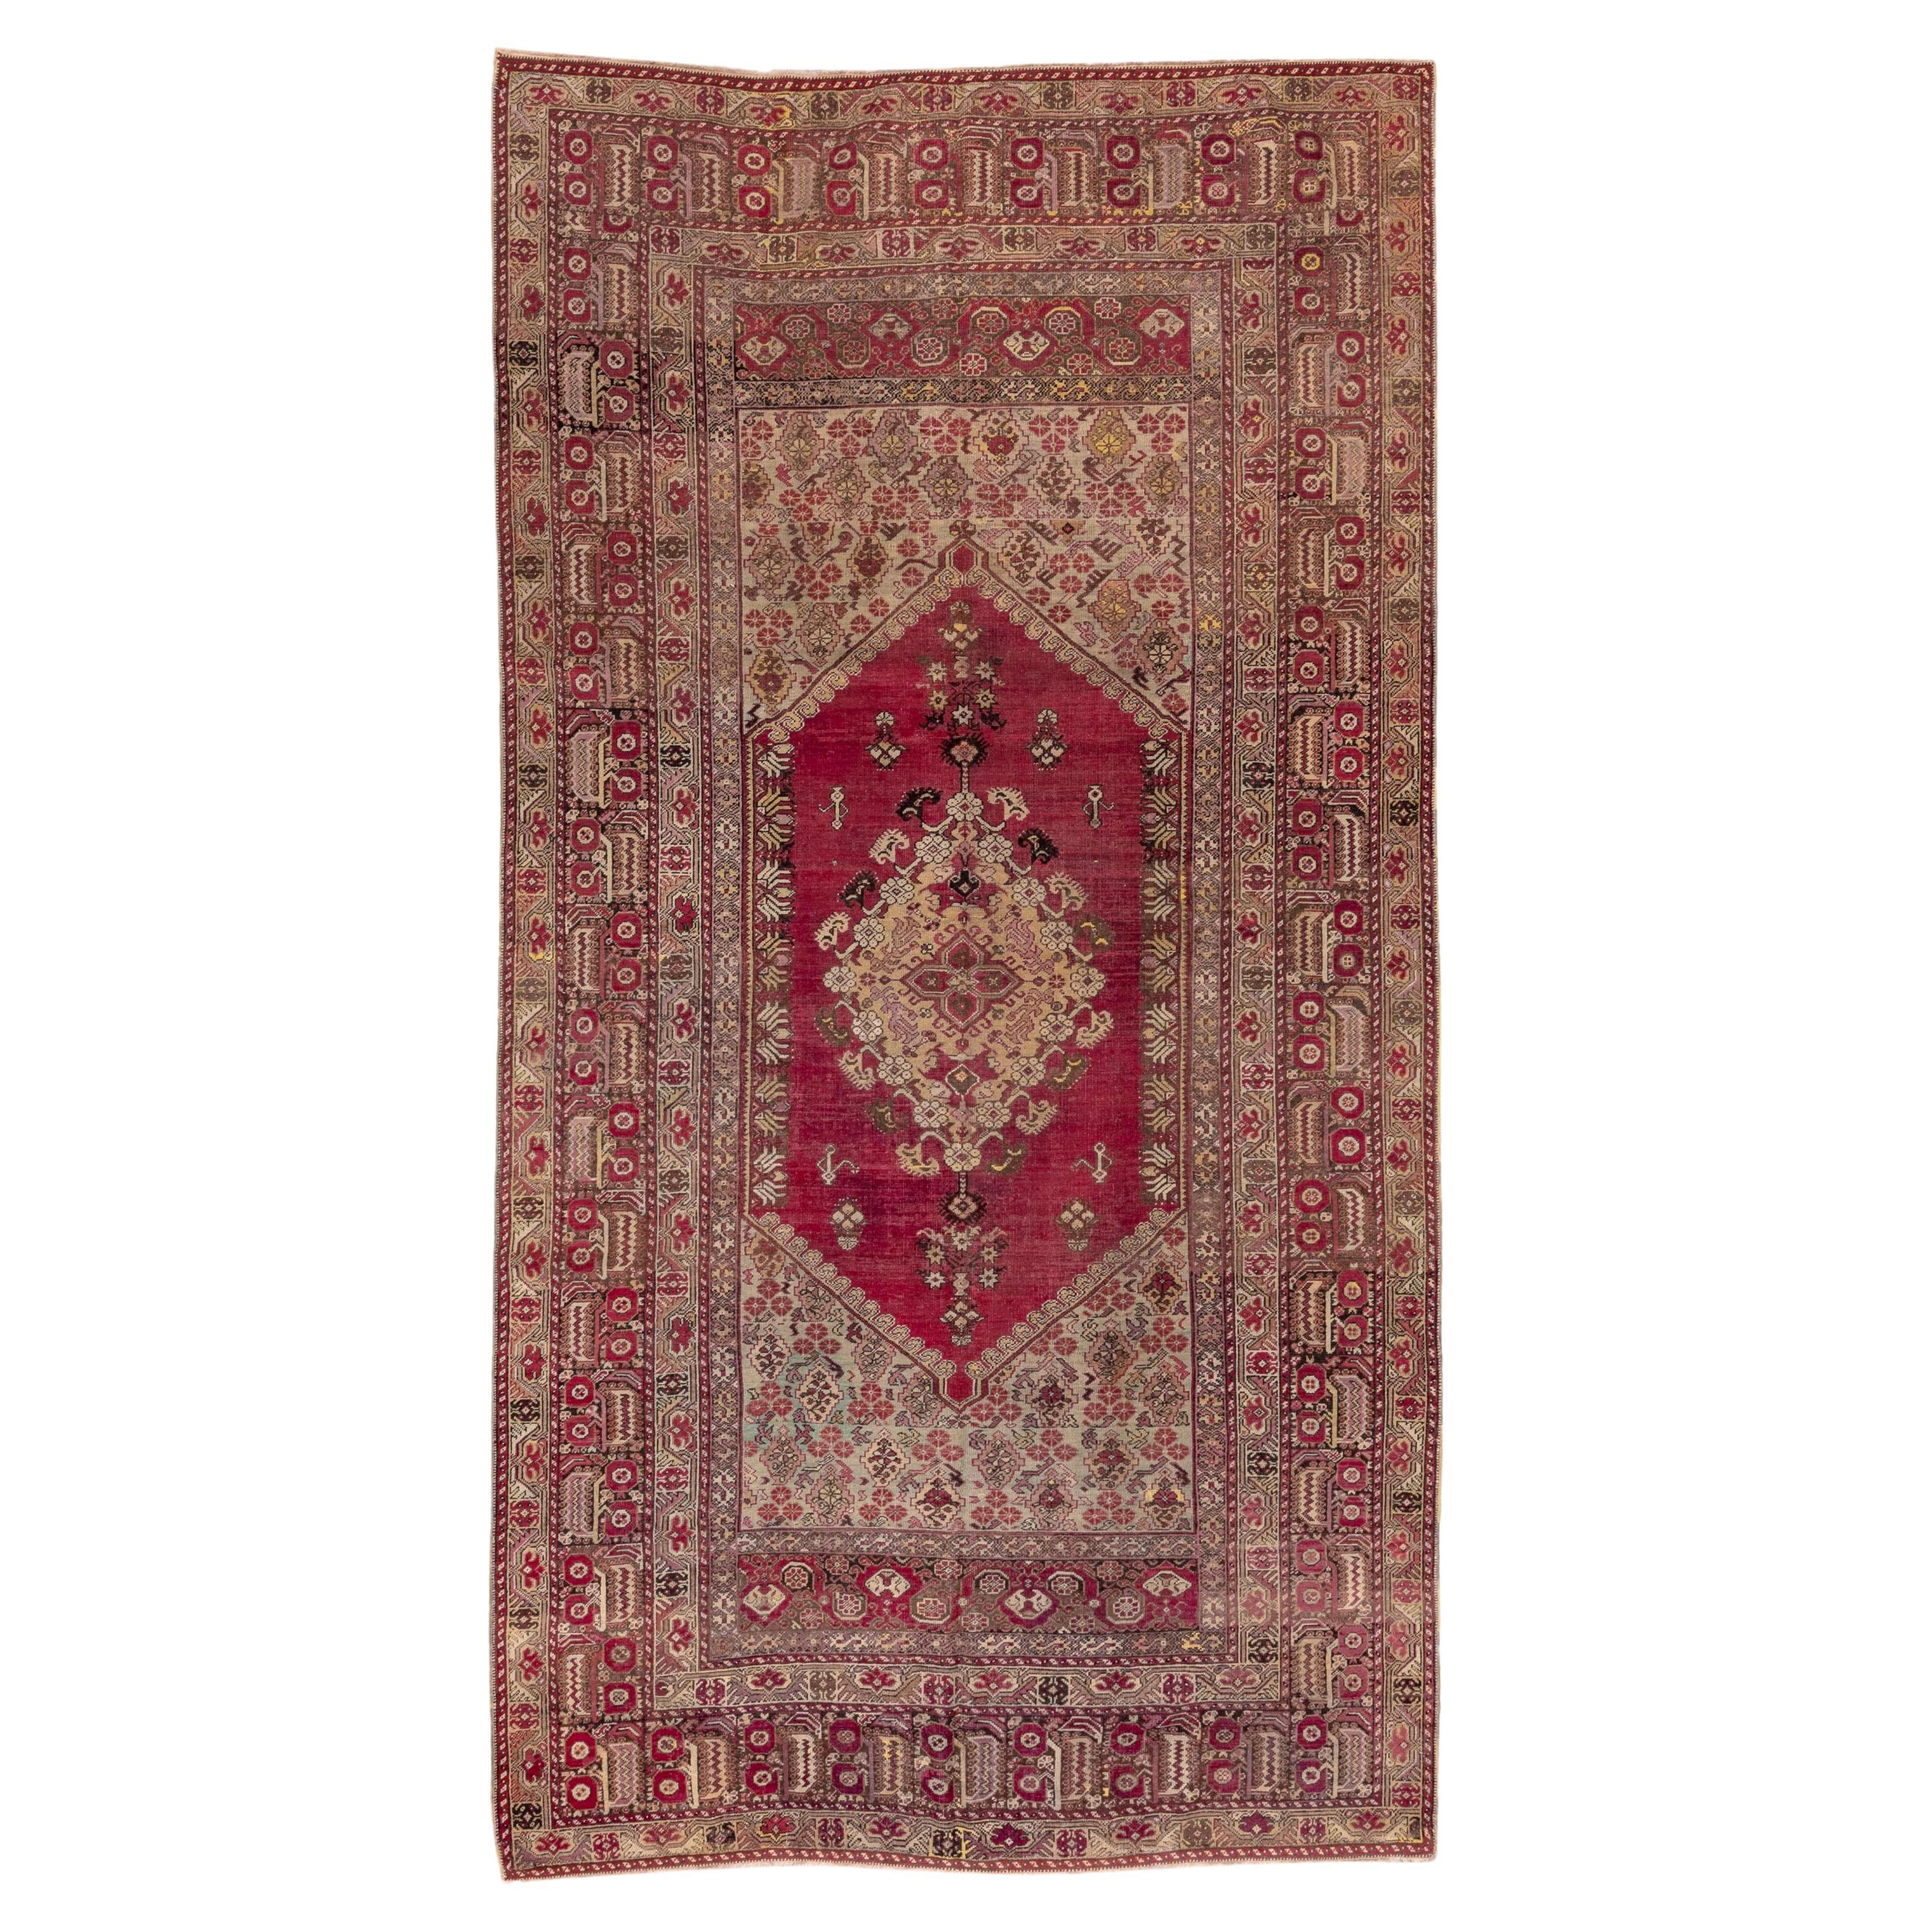 Finely Woven Late 19th Century Turkish Ghiordes Rug, Colorful Palette